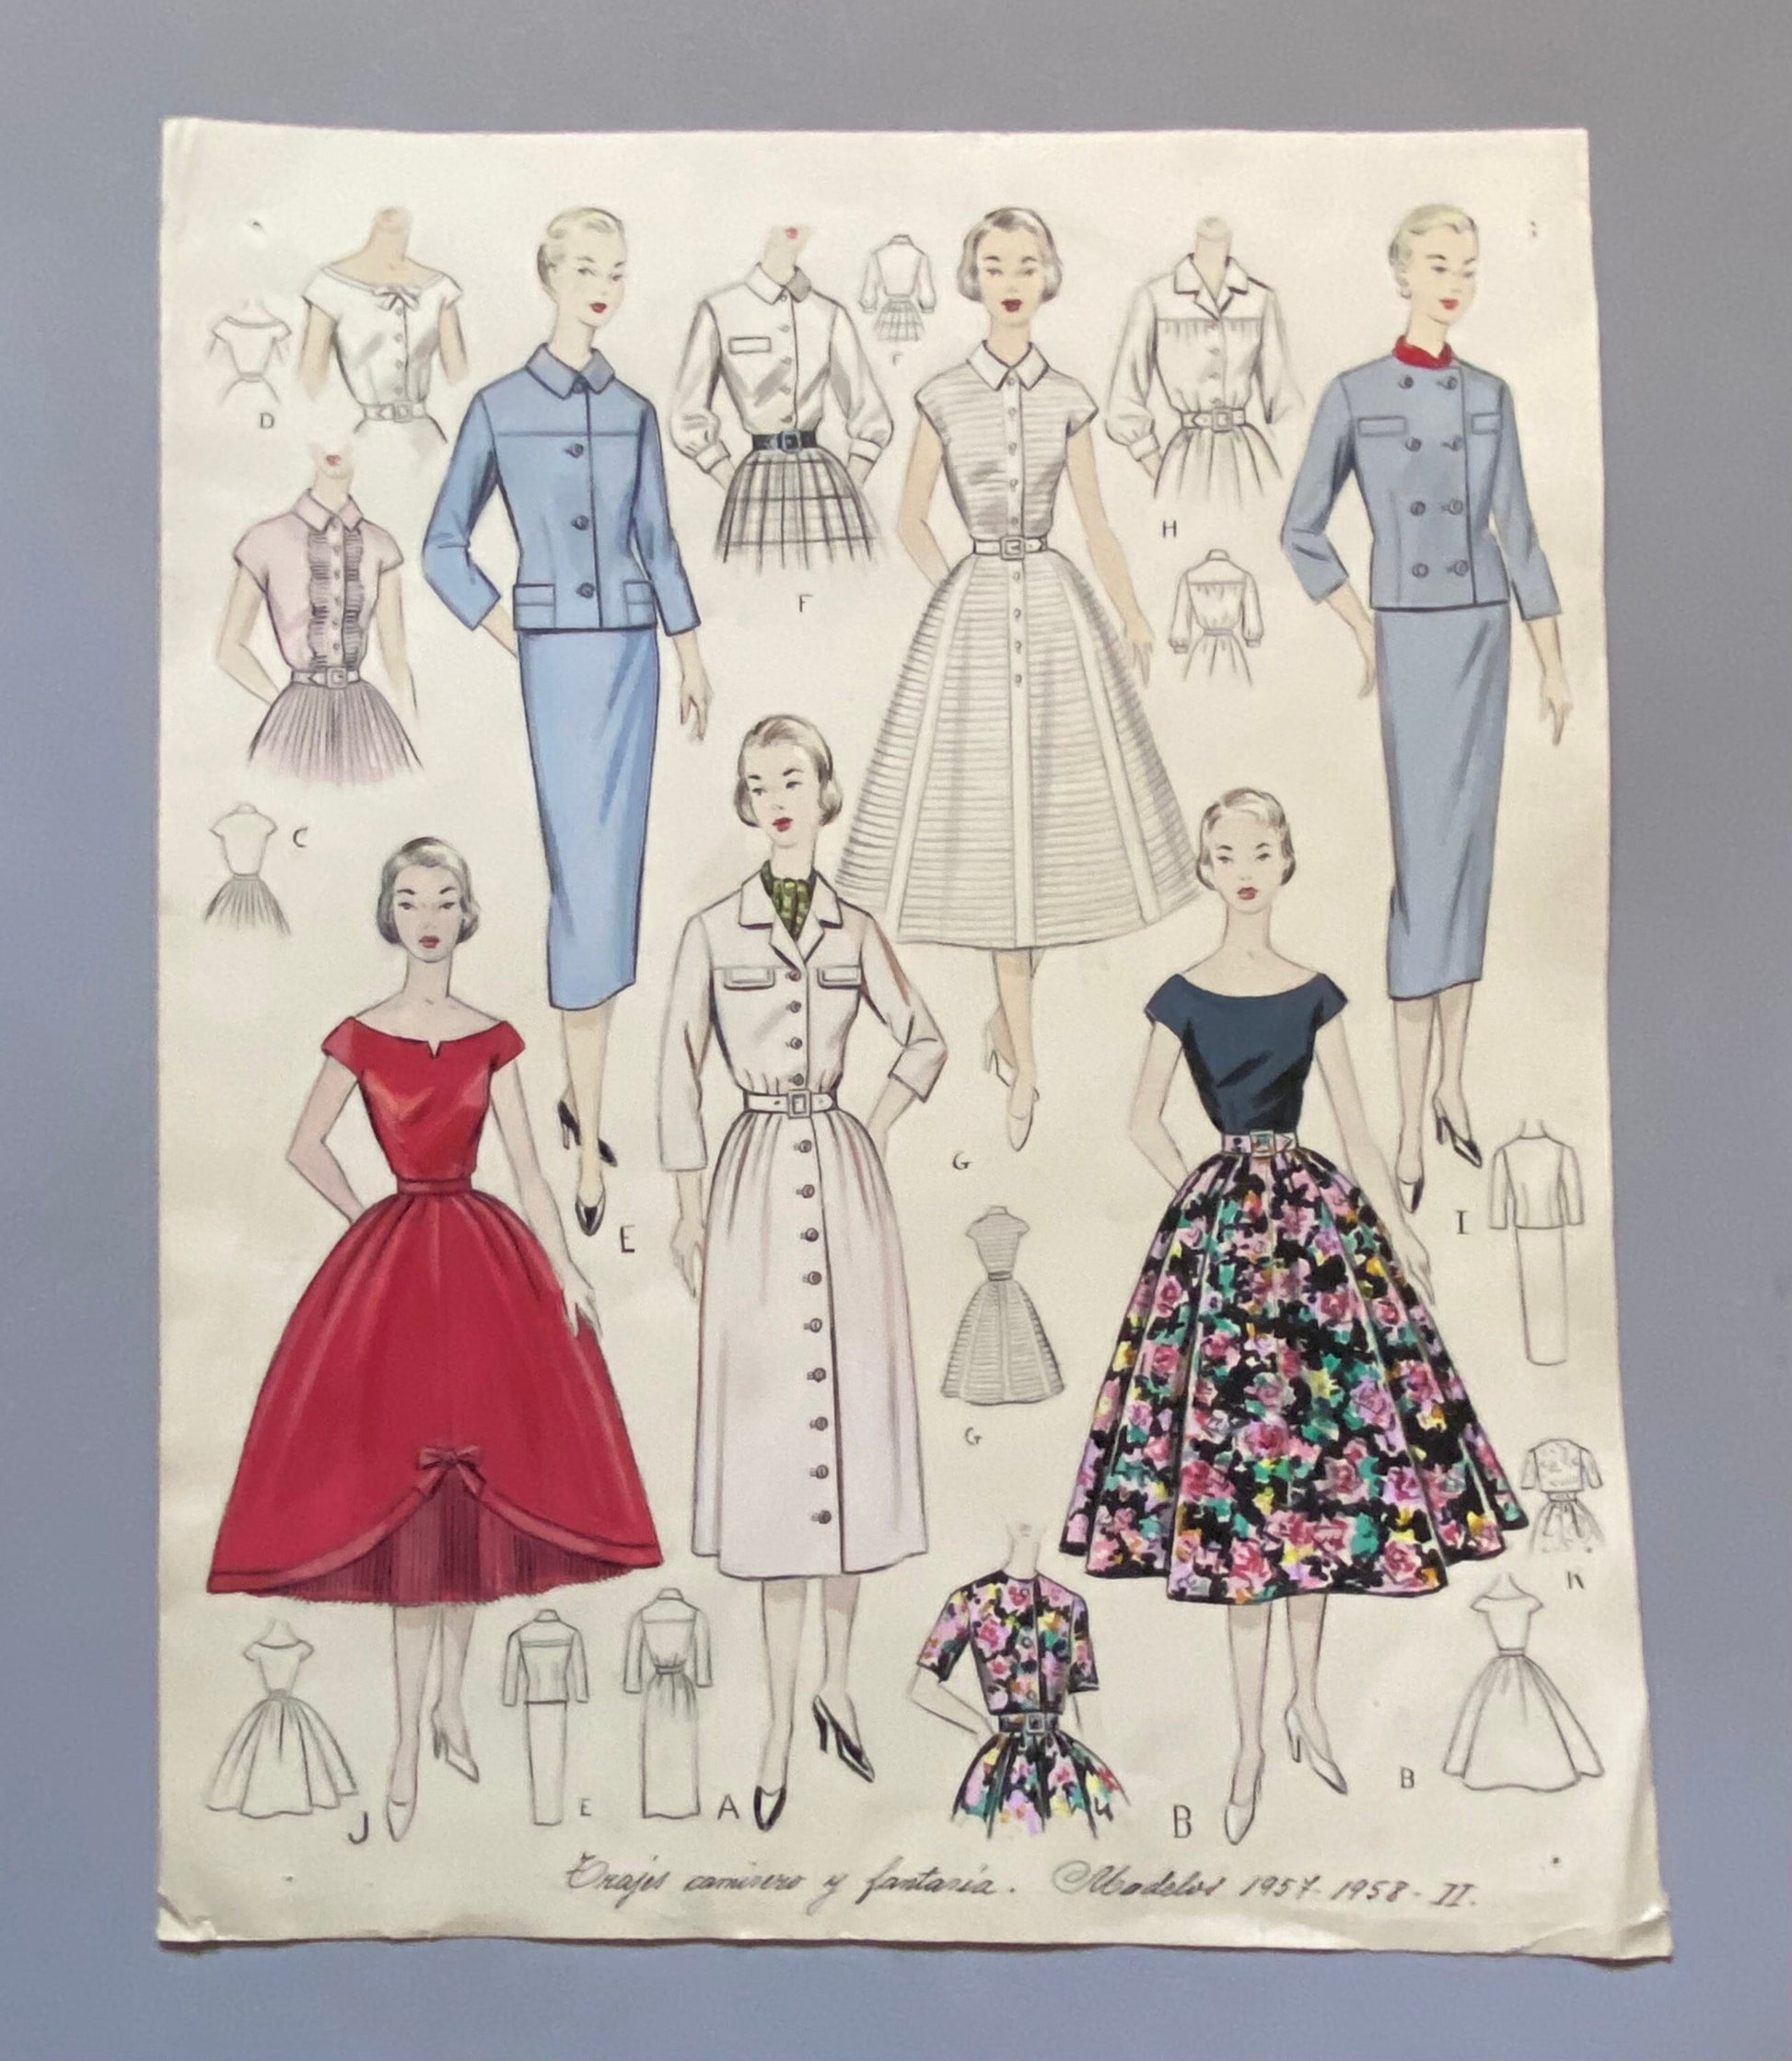 A Large Hand Drawn and Hand Painted Fashion Illustration. Spanish. From Barcelona. 1957 - 1958. Size: 52 x 41.5 cms.